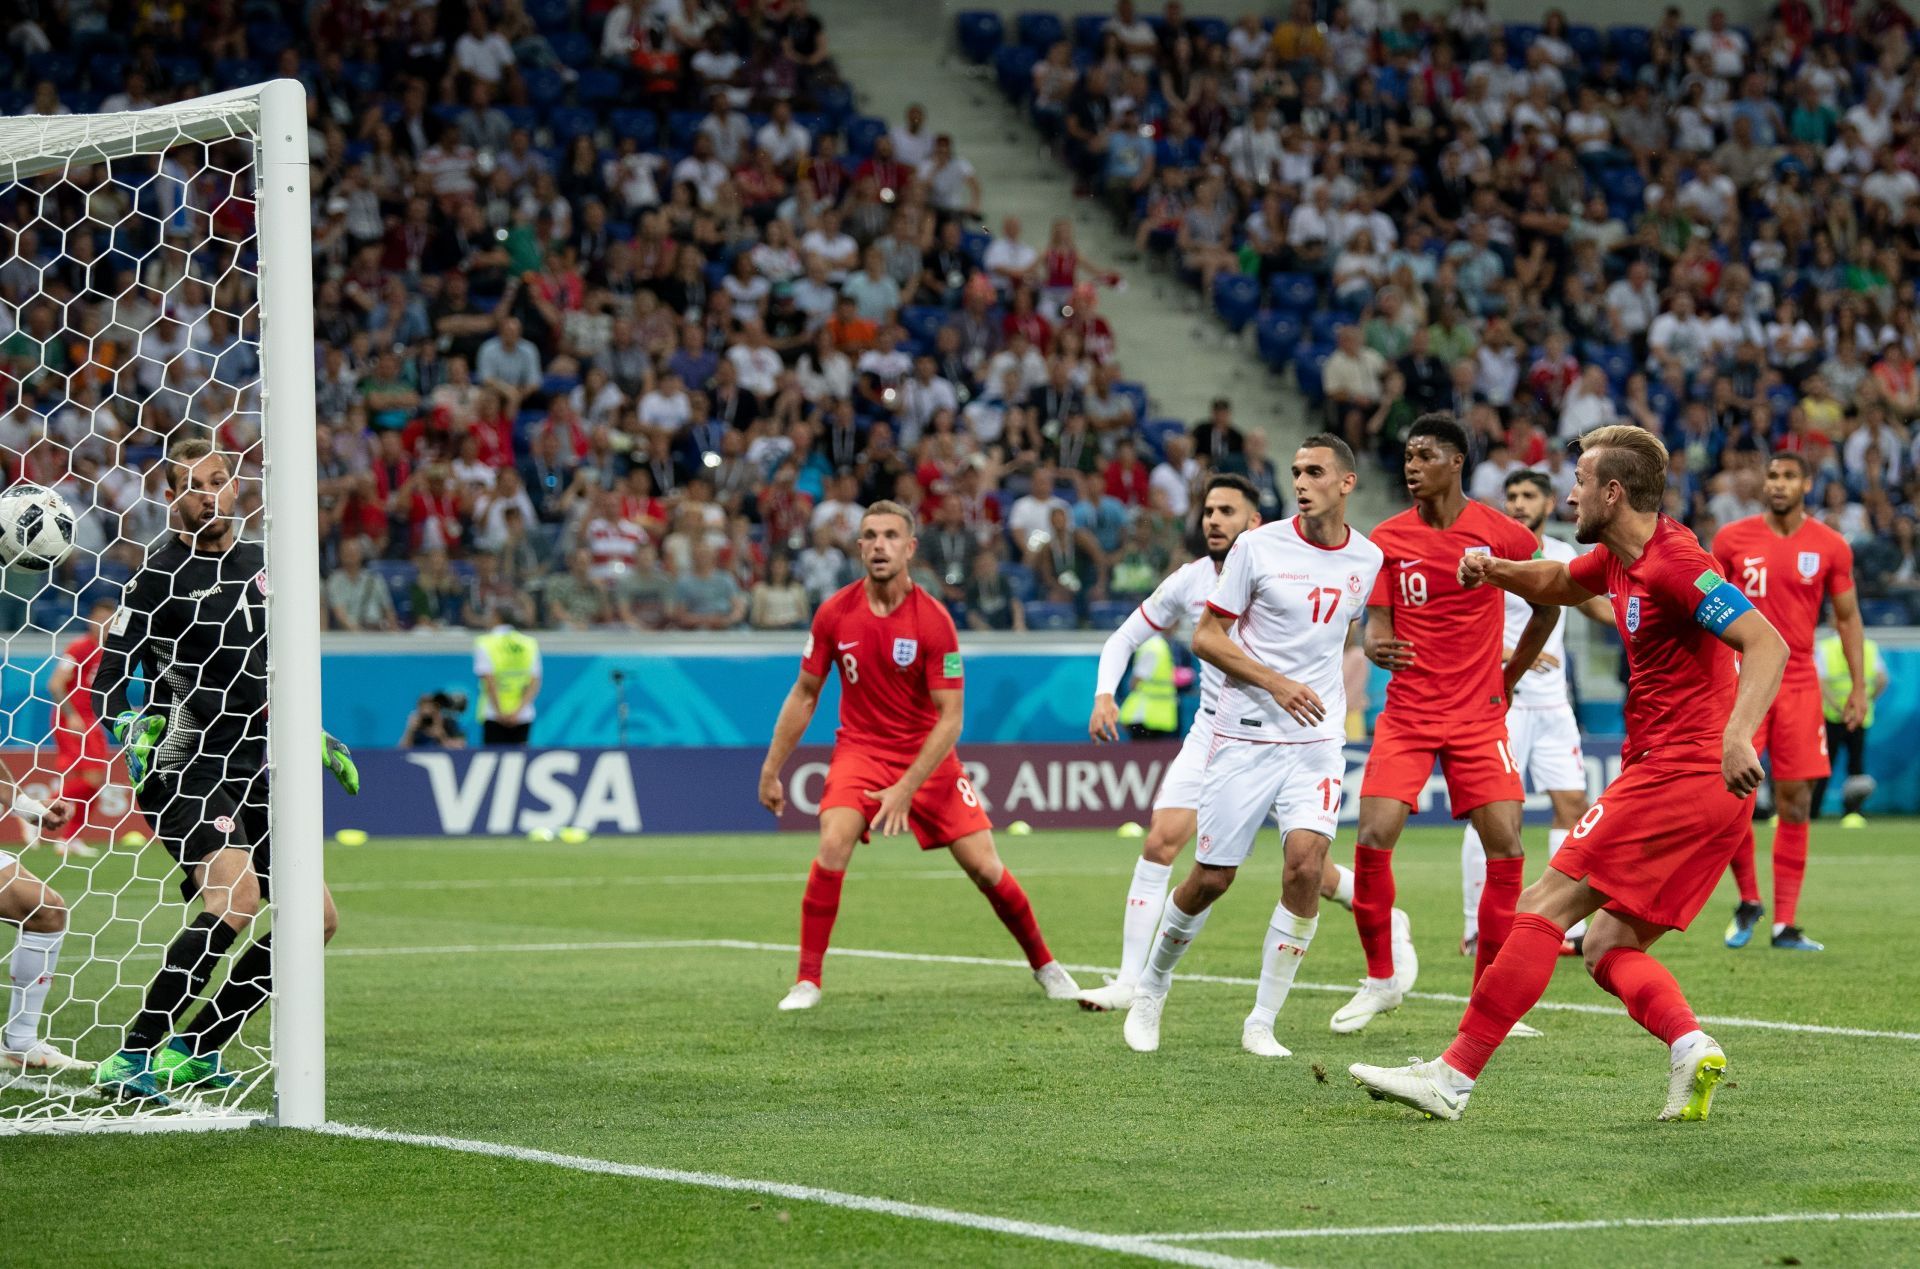 Kane netted a vital winner in the last World Cup opener